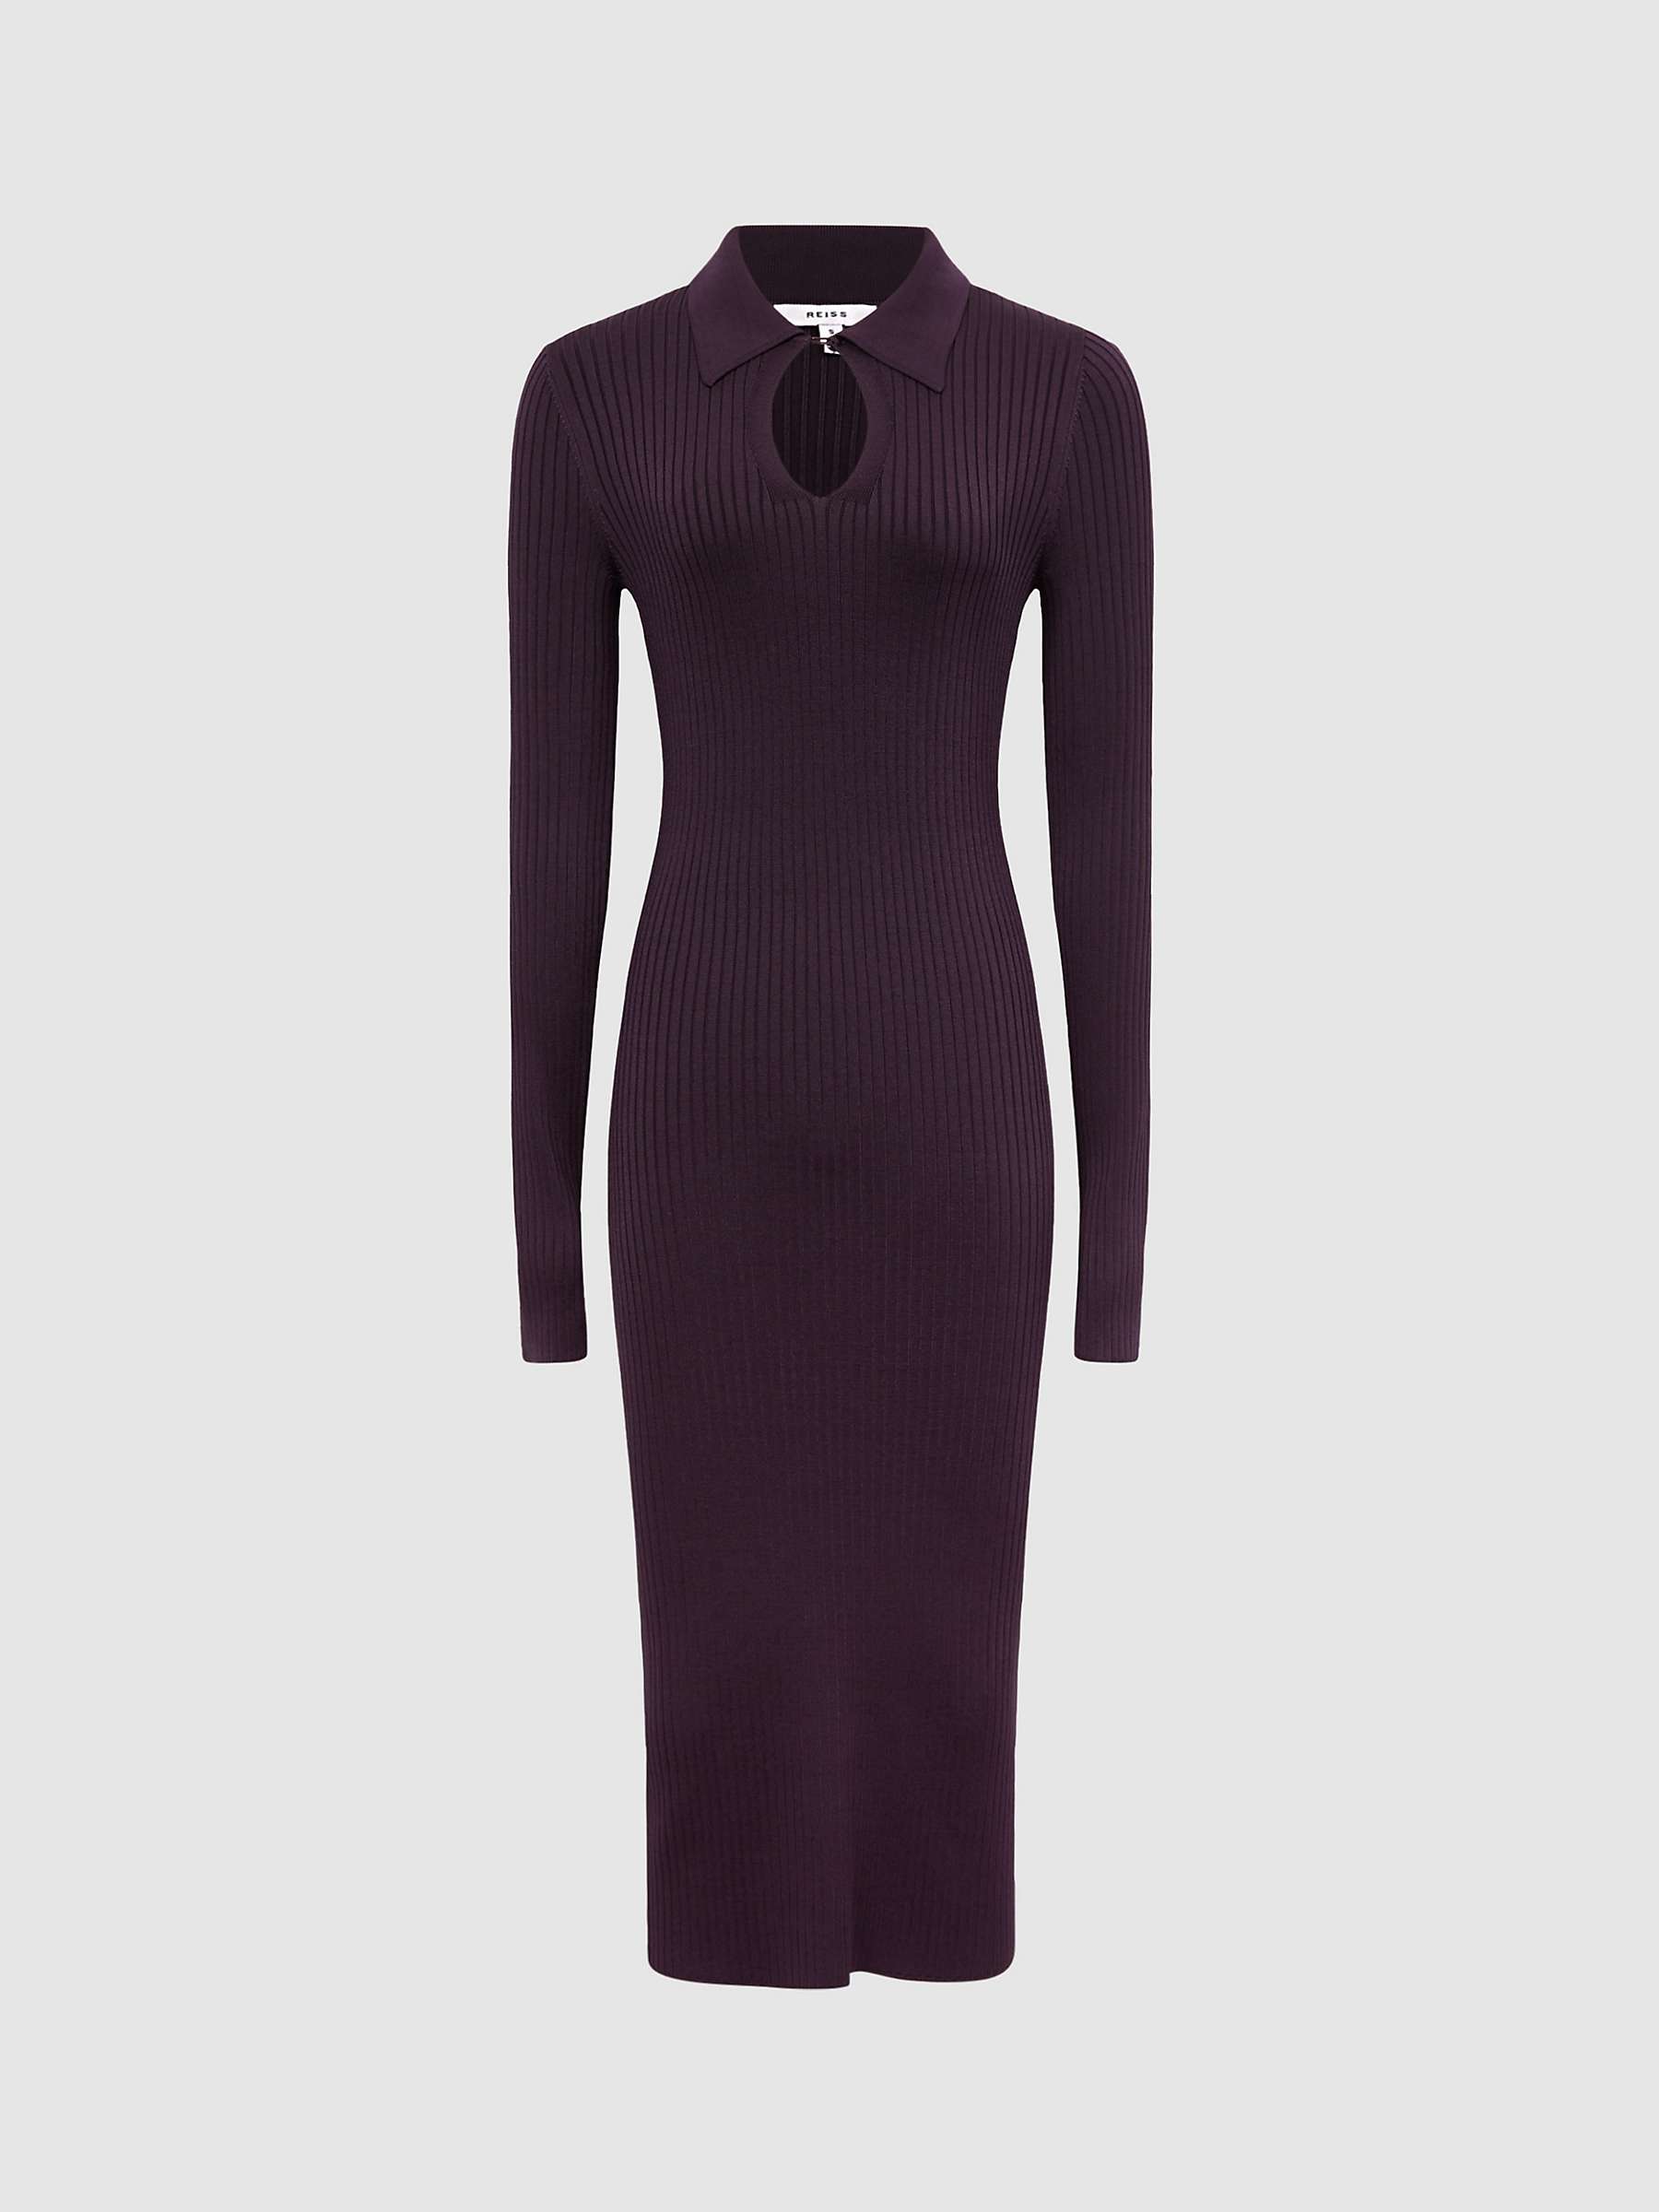 Reiss Ronnie Collared Jumper Dress, Purple at John Lewis & Partners